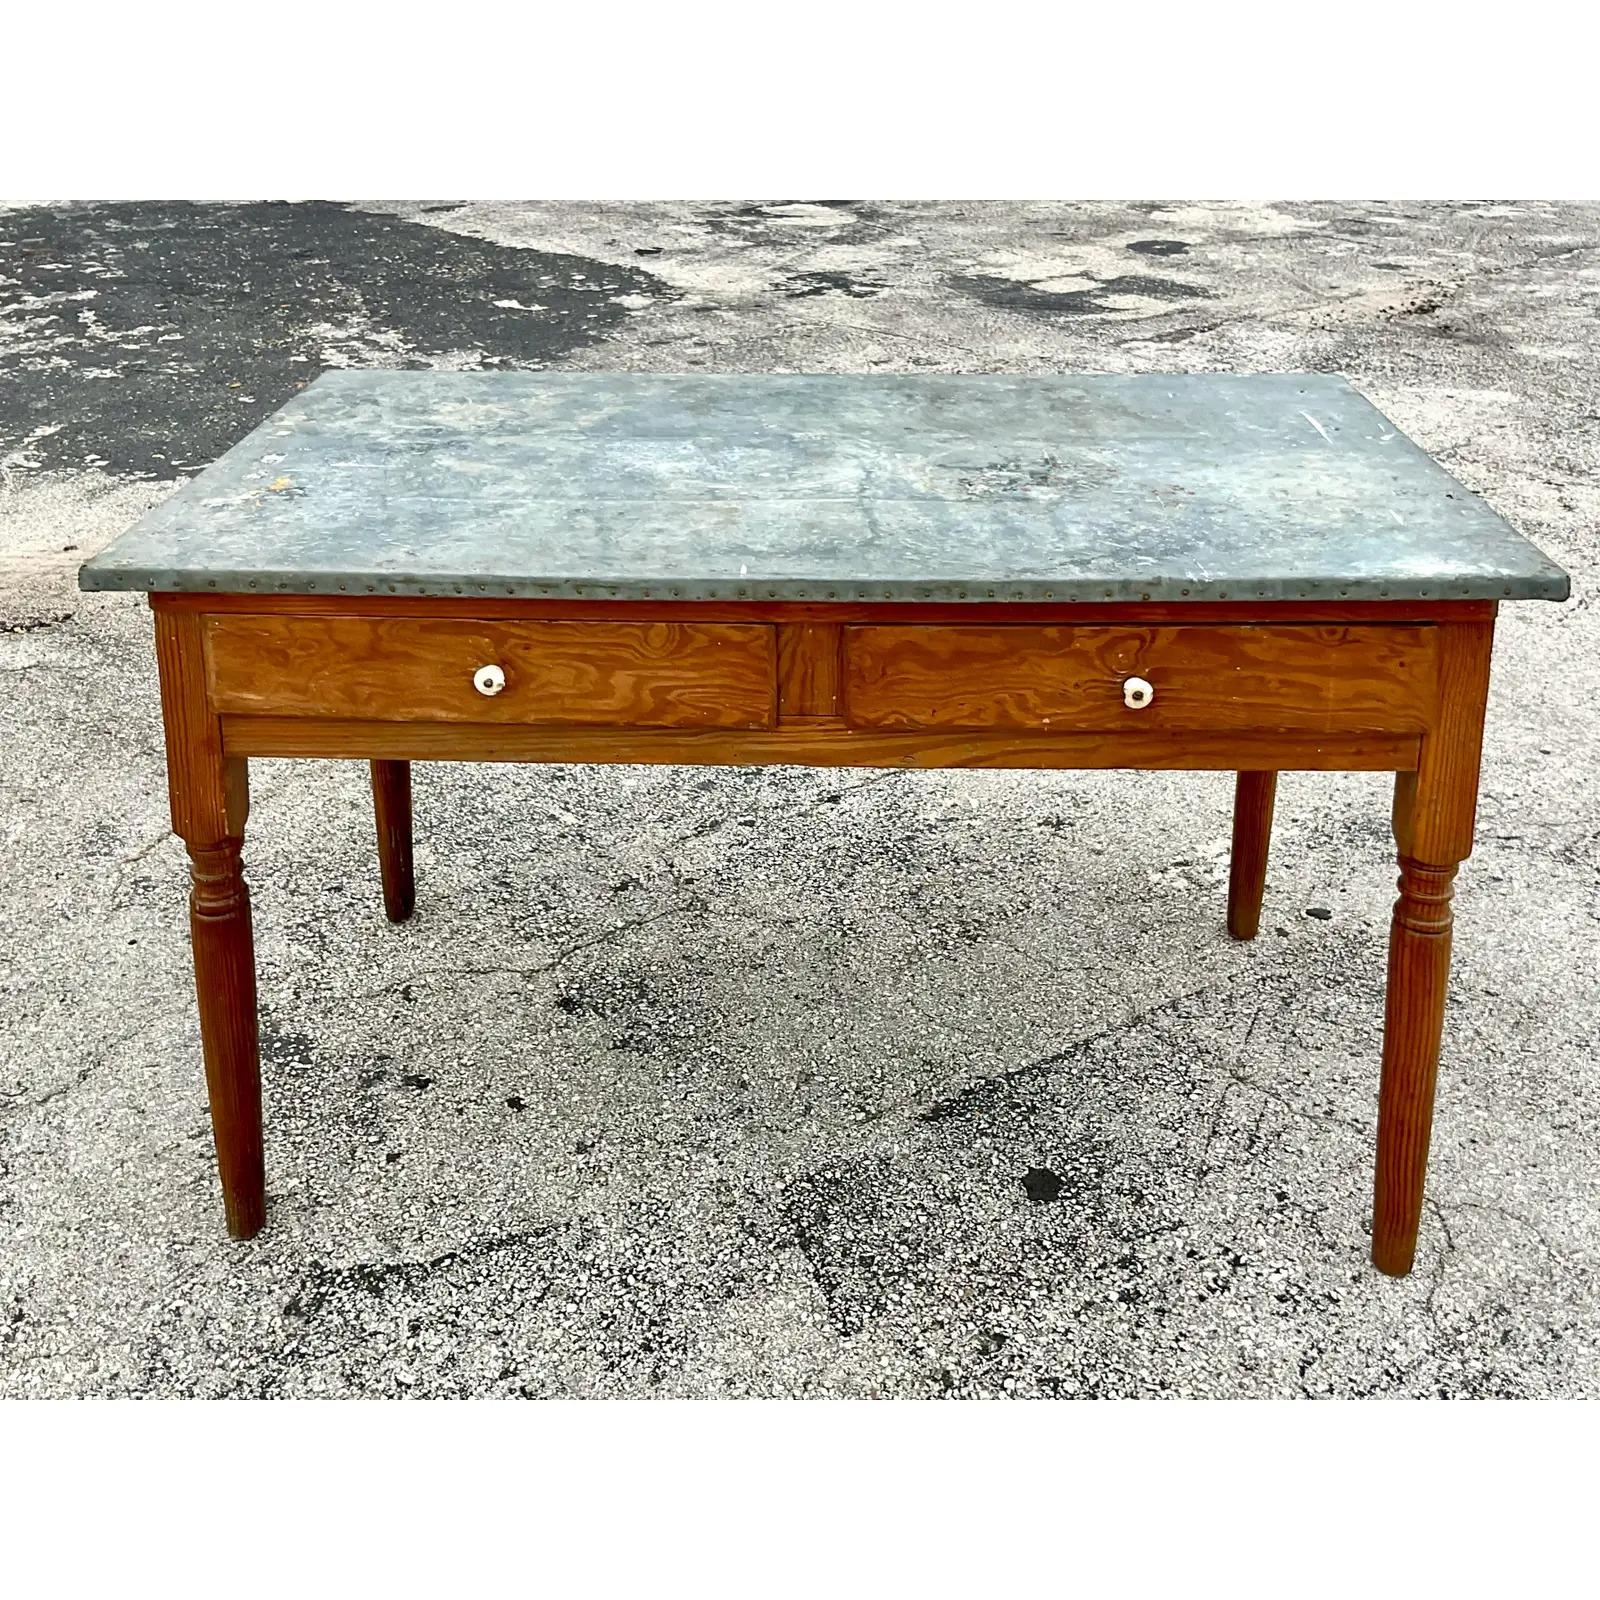 A striking vintage Boho dining table. Chic tin wrapped top with hand hammered nails along the edge. The perfect amount of all over distressed finish for that farm house look. Acquired from a Palm Beach estate.